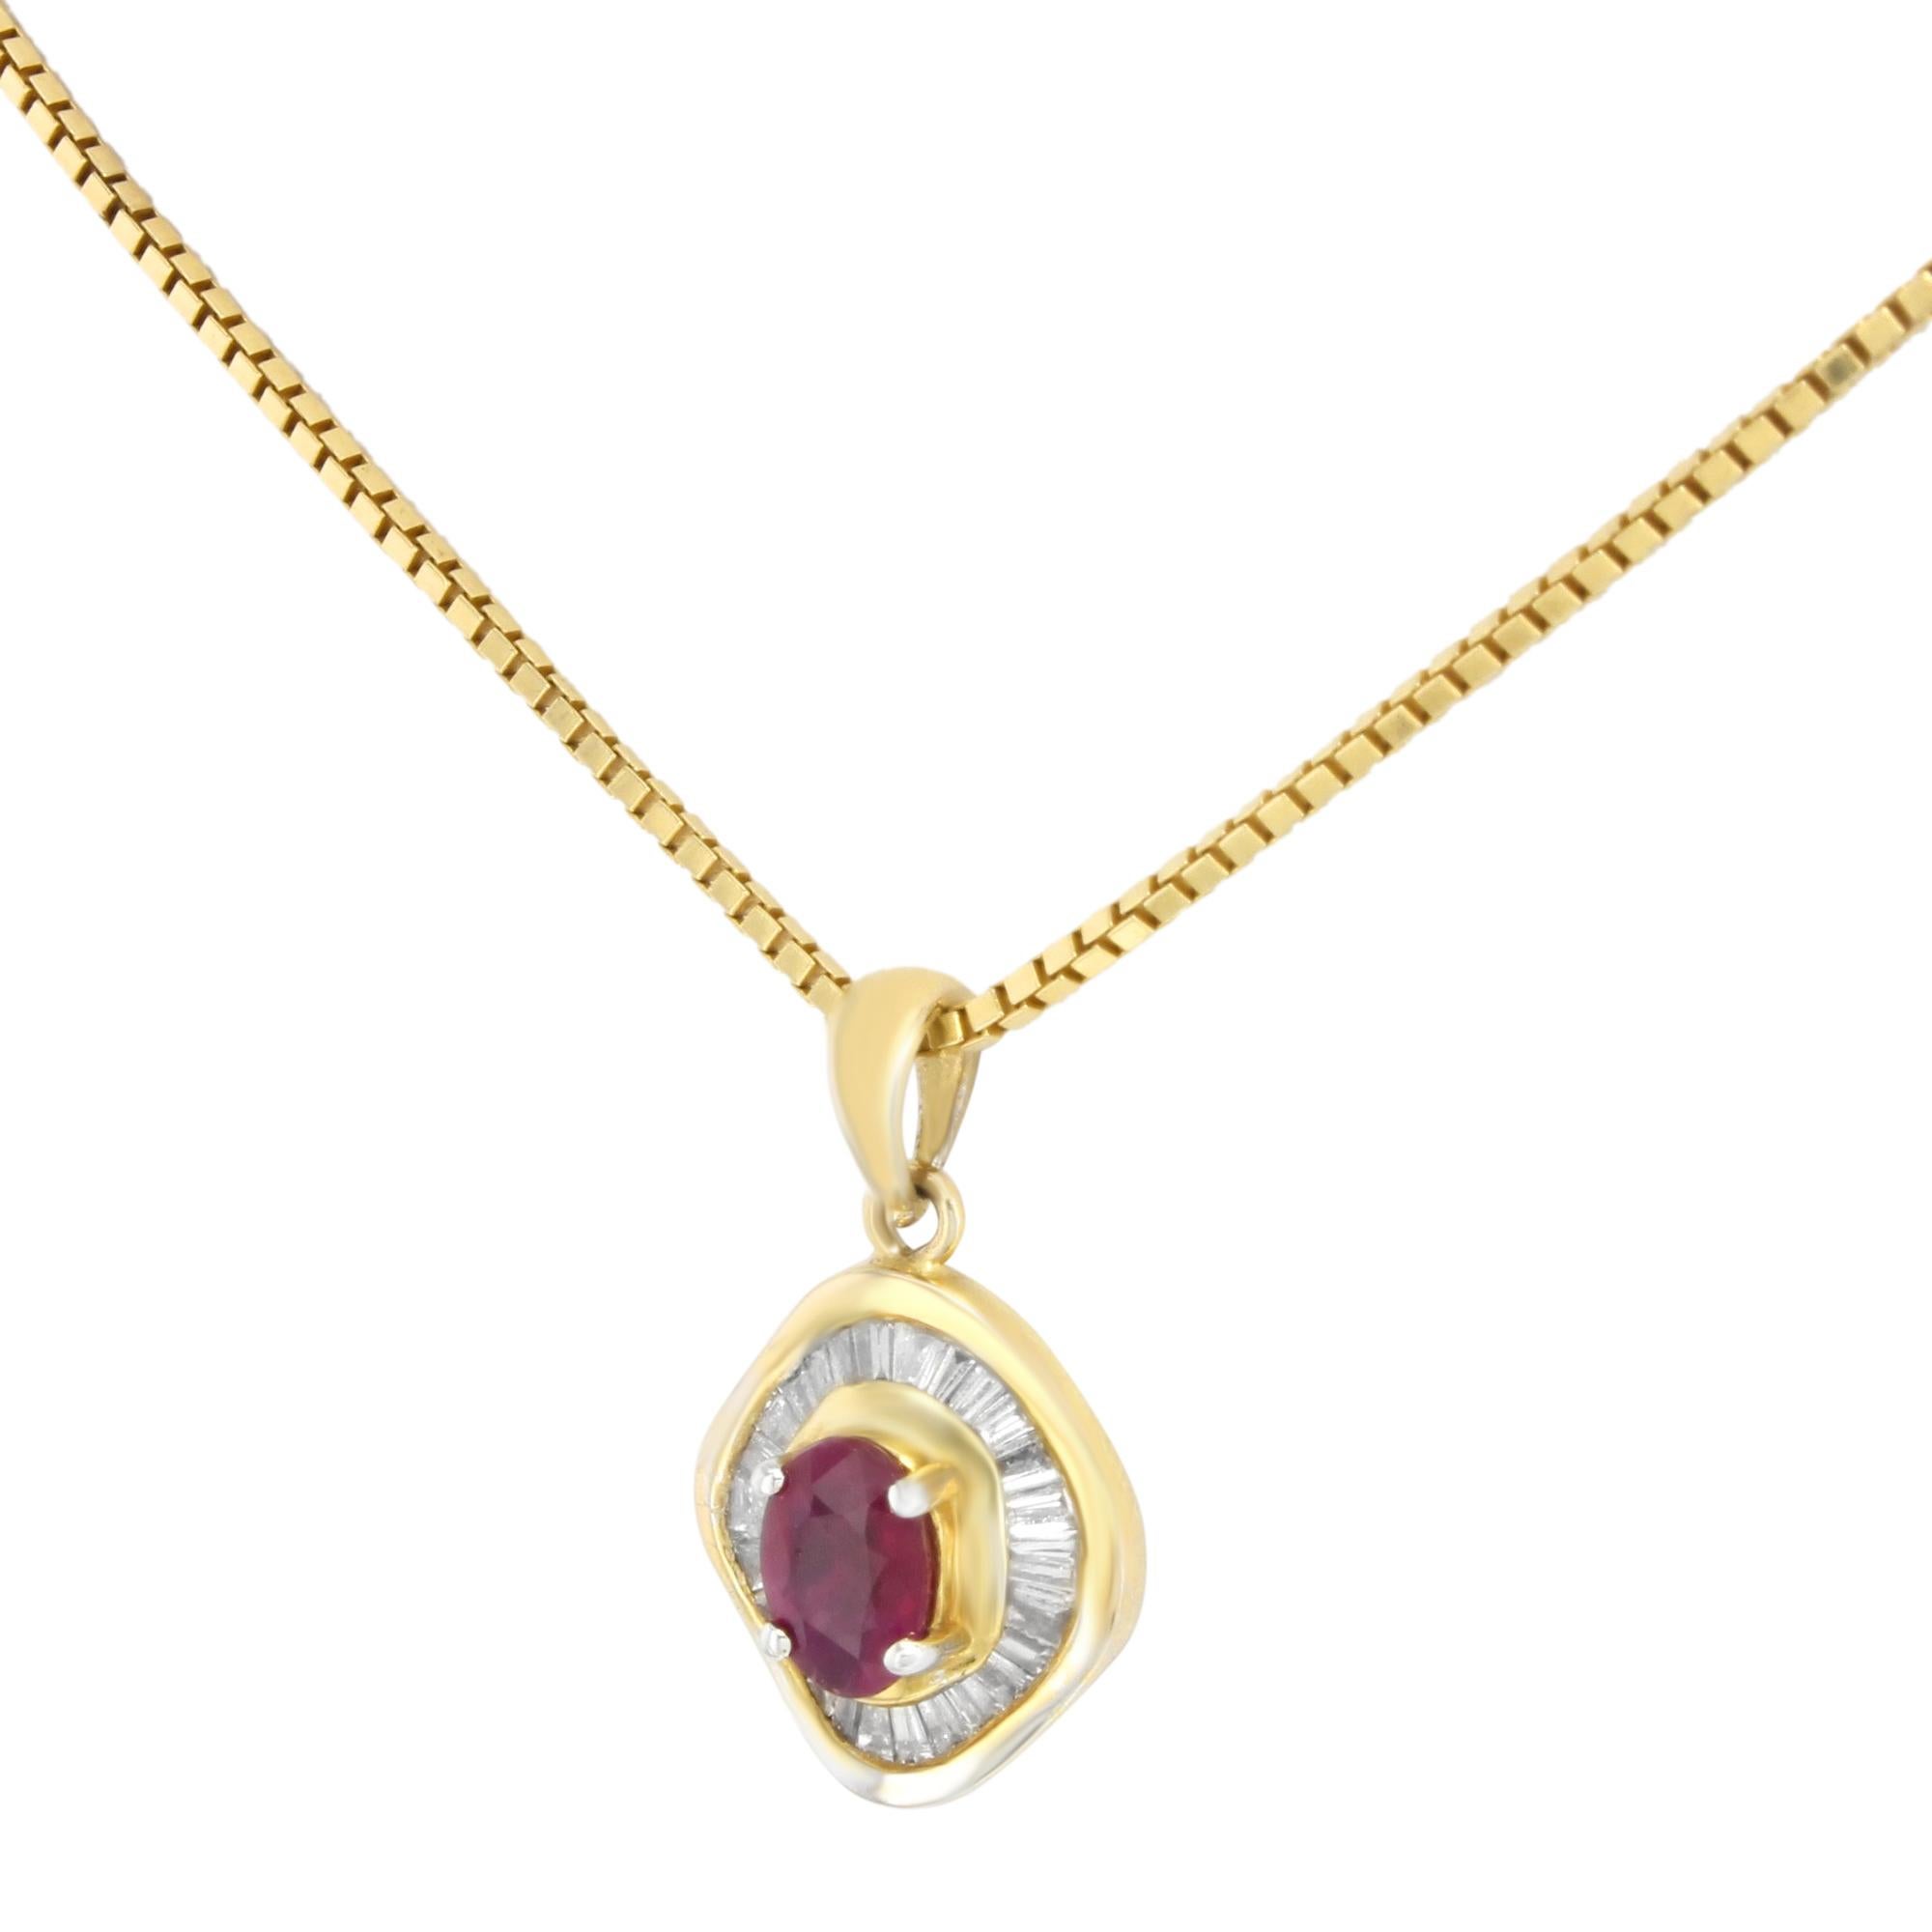 This beautiful jewelry set includes ring, necklace and earrings crafted in 14K yellow gold with appx. 1.75 cttw rubies and 0.50 cttw diamonds. The ring has 6.5 x 5mm ruby as a center stone and 0.15 cttw round and baguette cut diamonds as accent